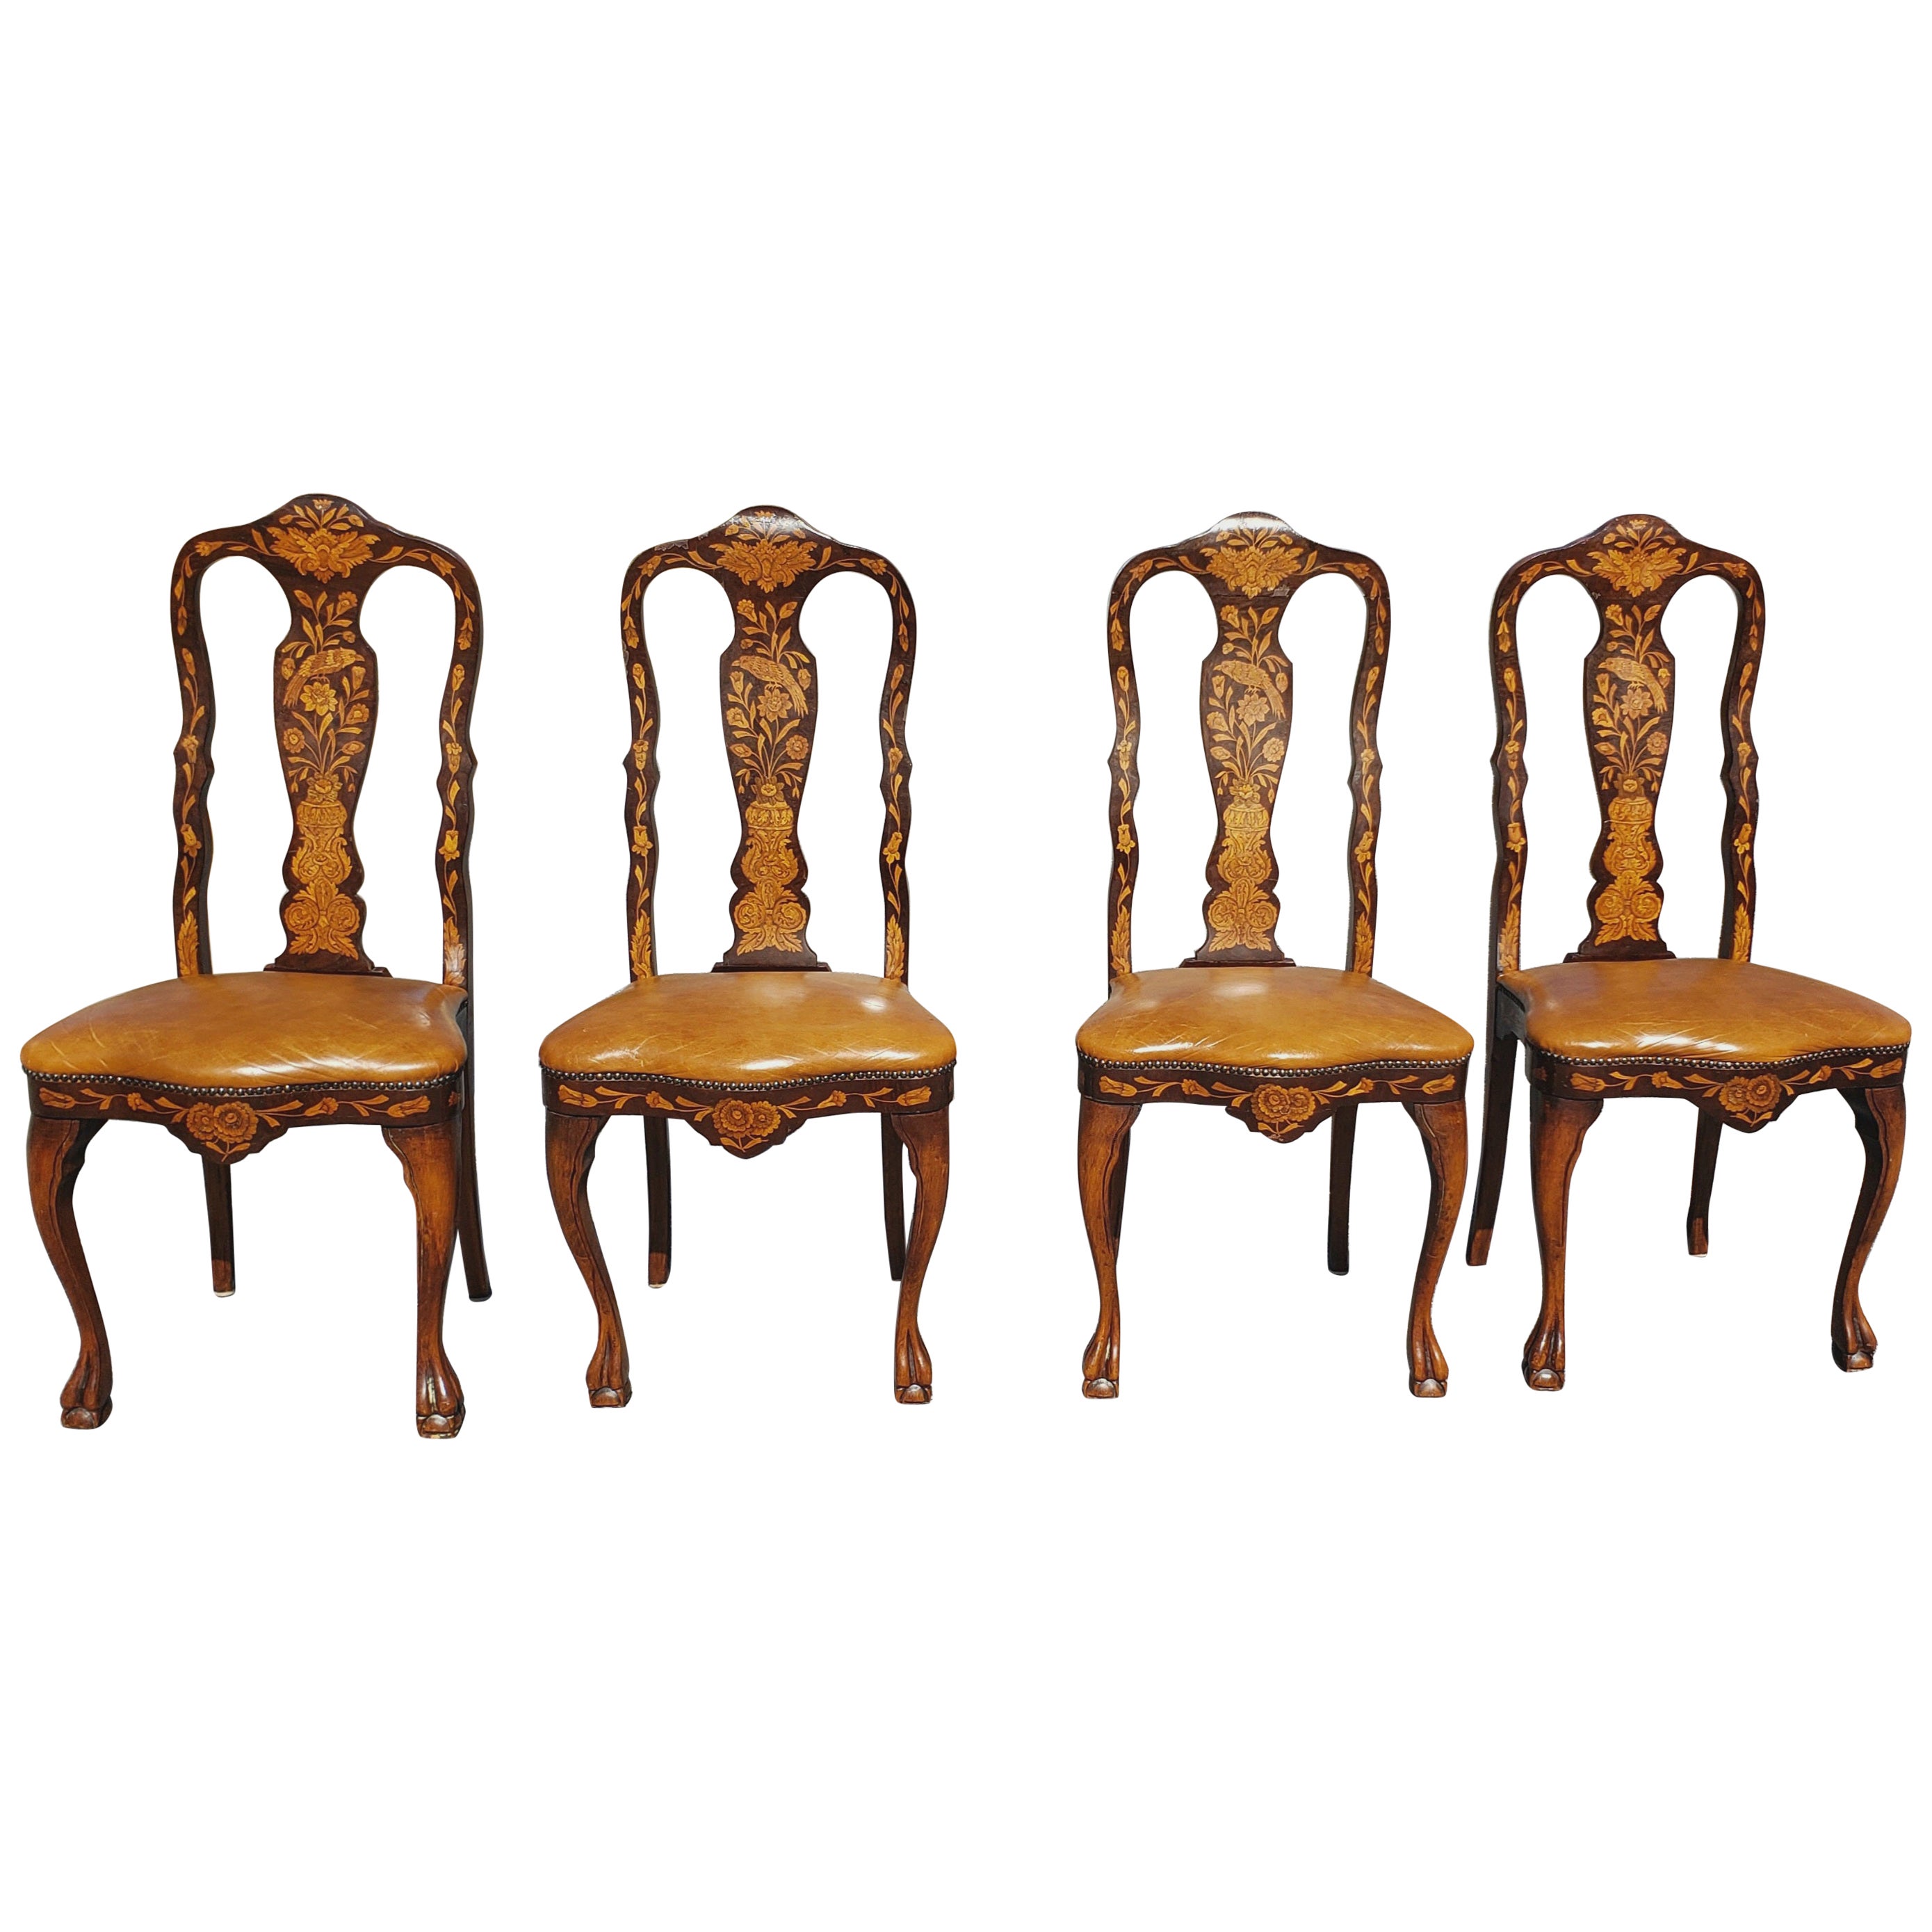 Set of 4 Dutch Marquetry Mahogany Satinwood and Leather Seat Dining Chairs For Sale